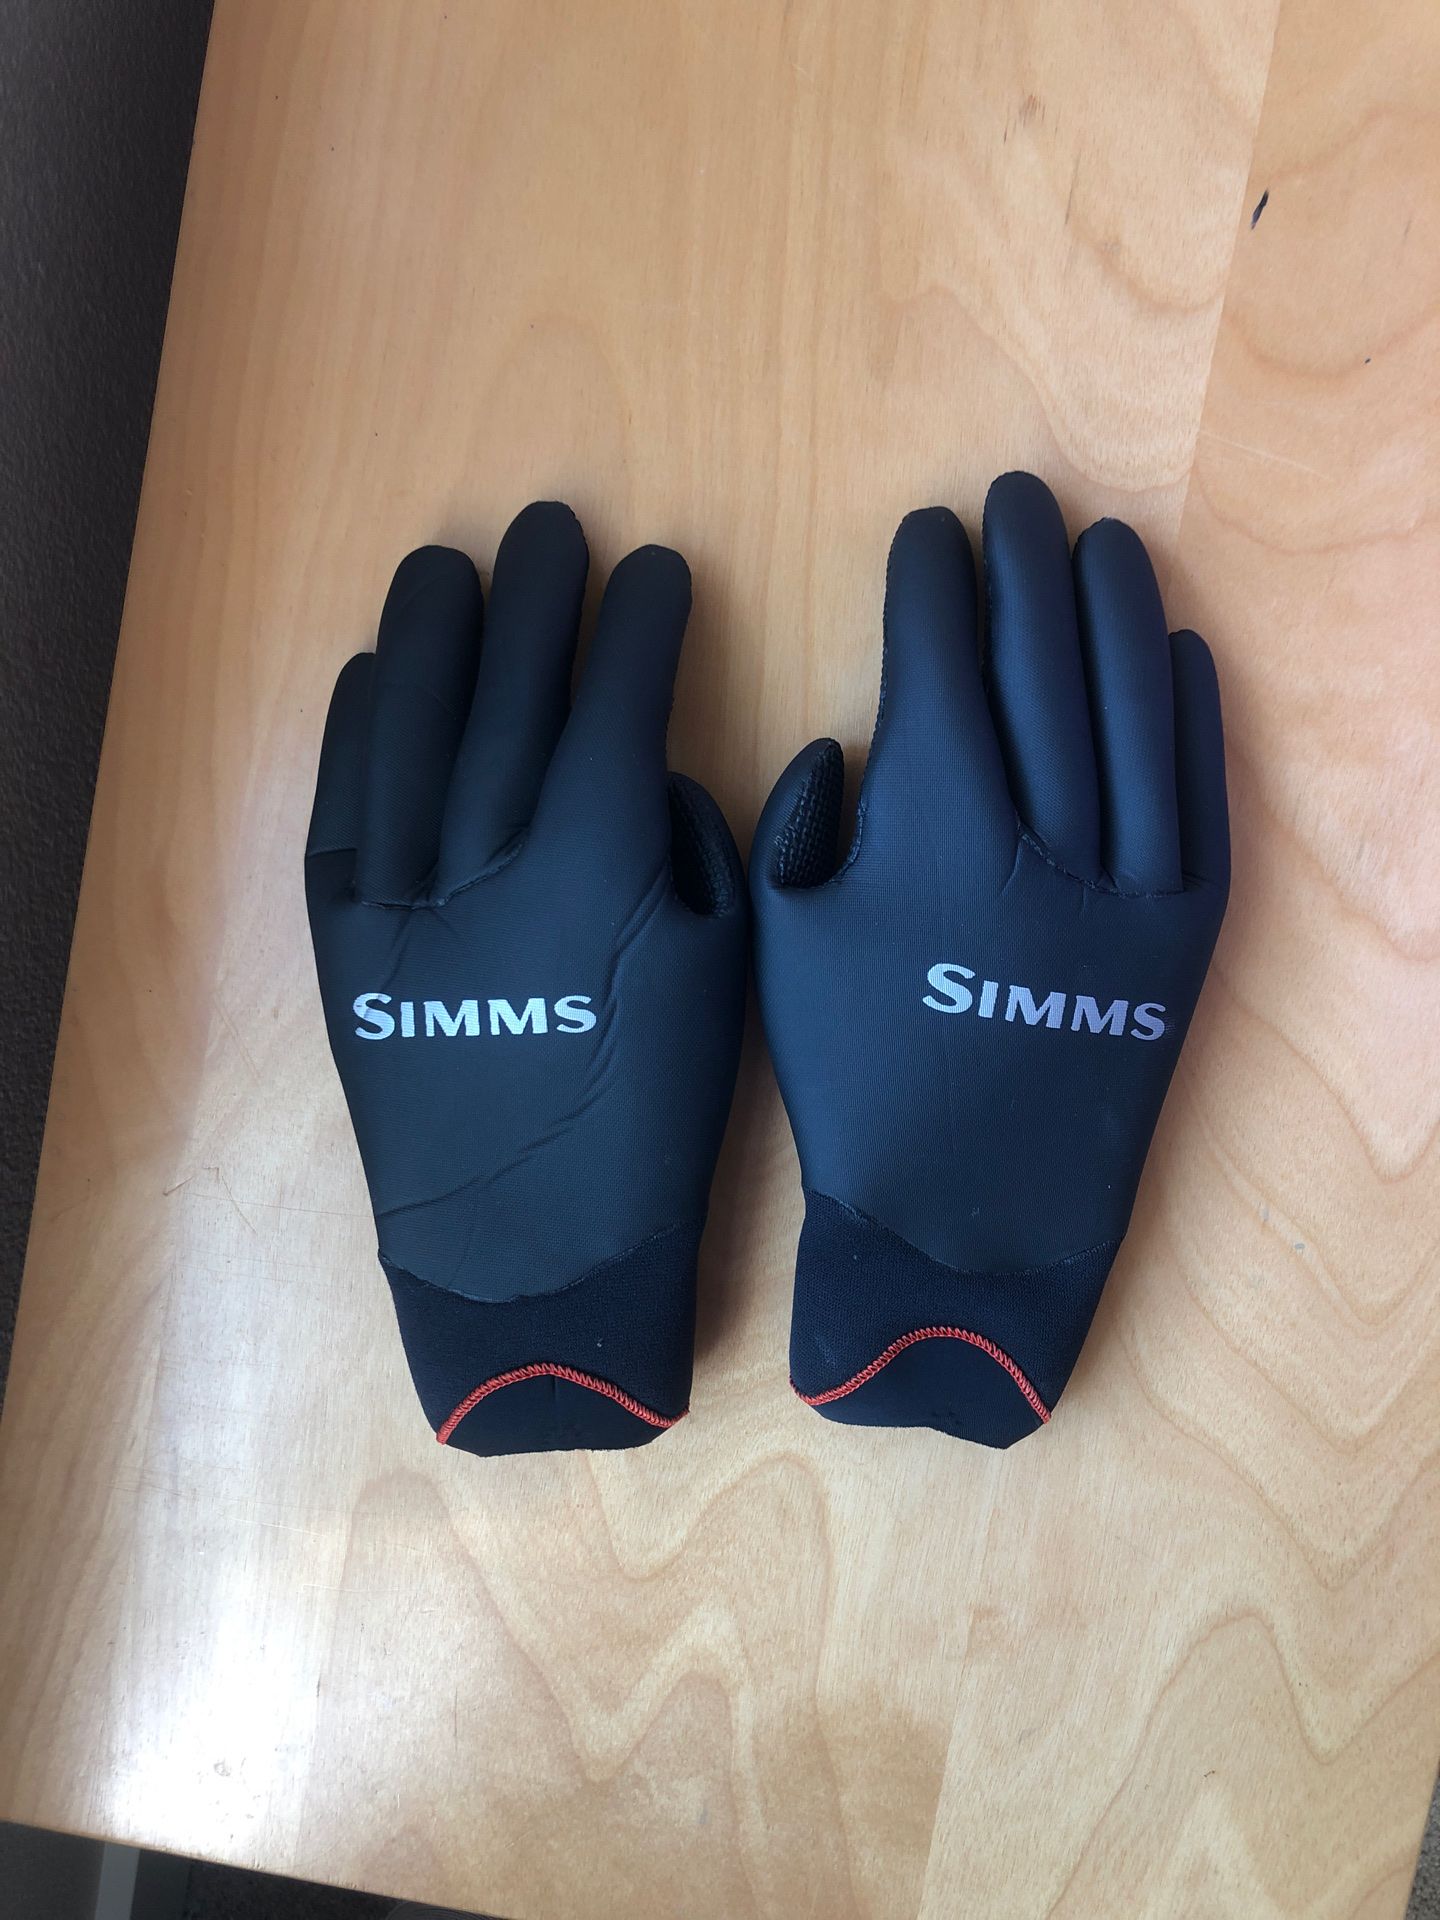 Simms woman’s fishing gloves